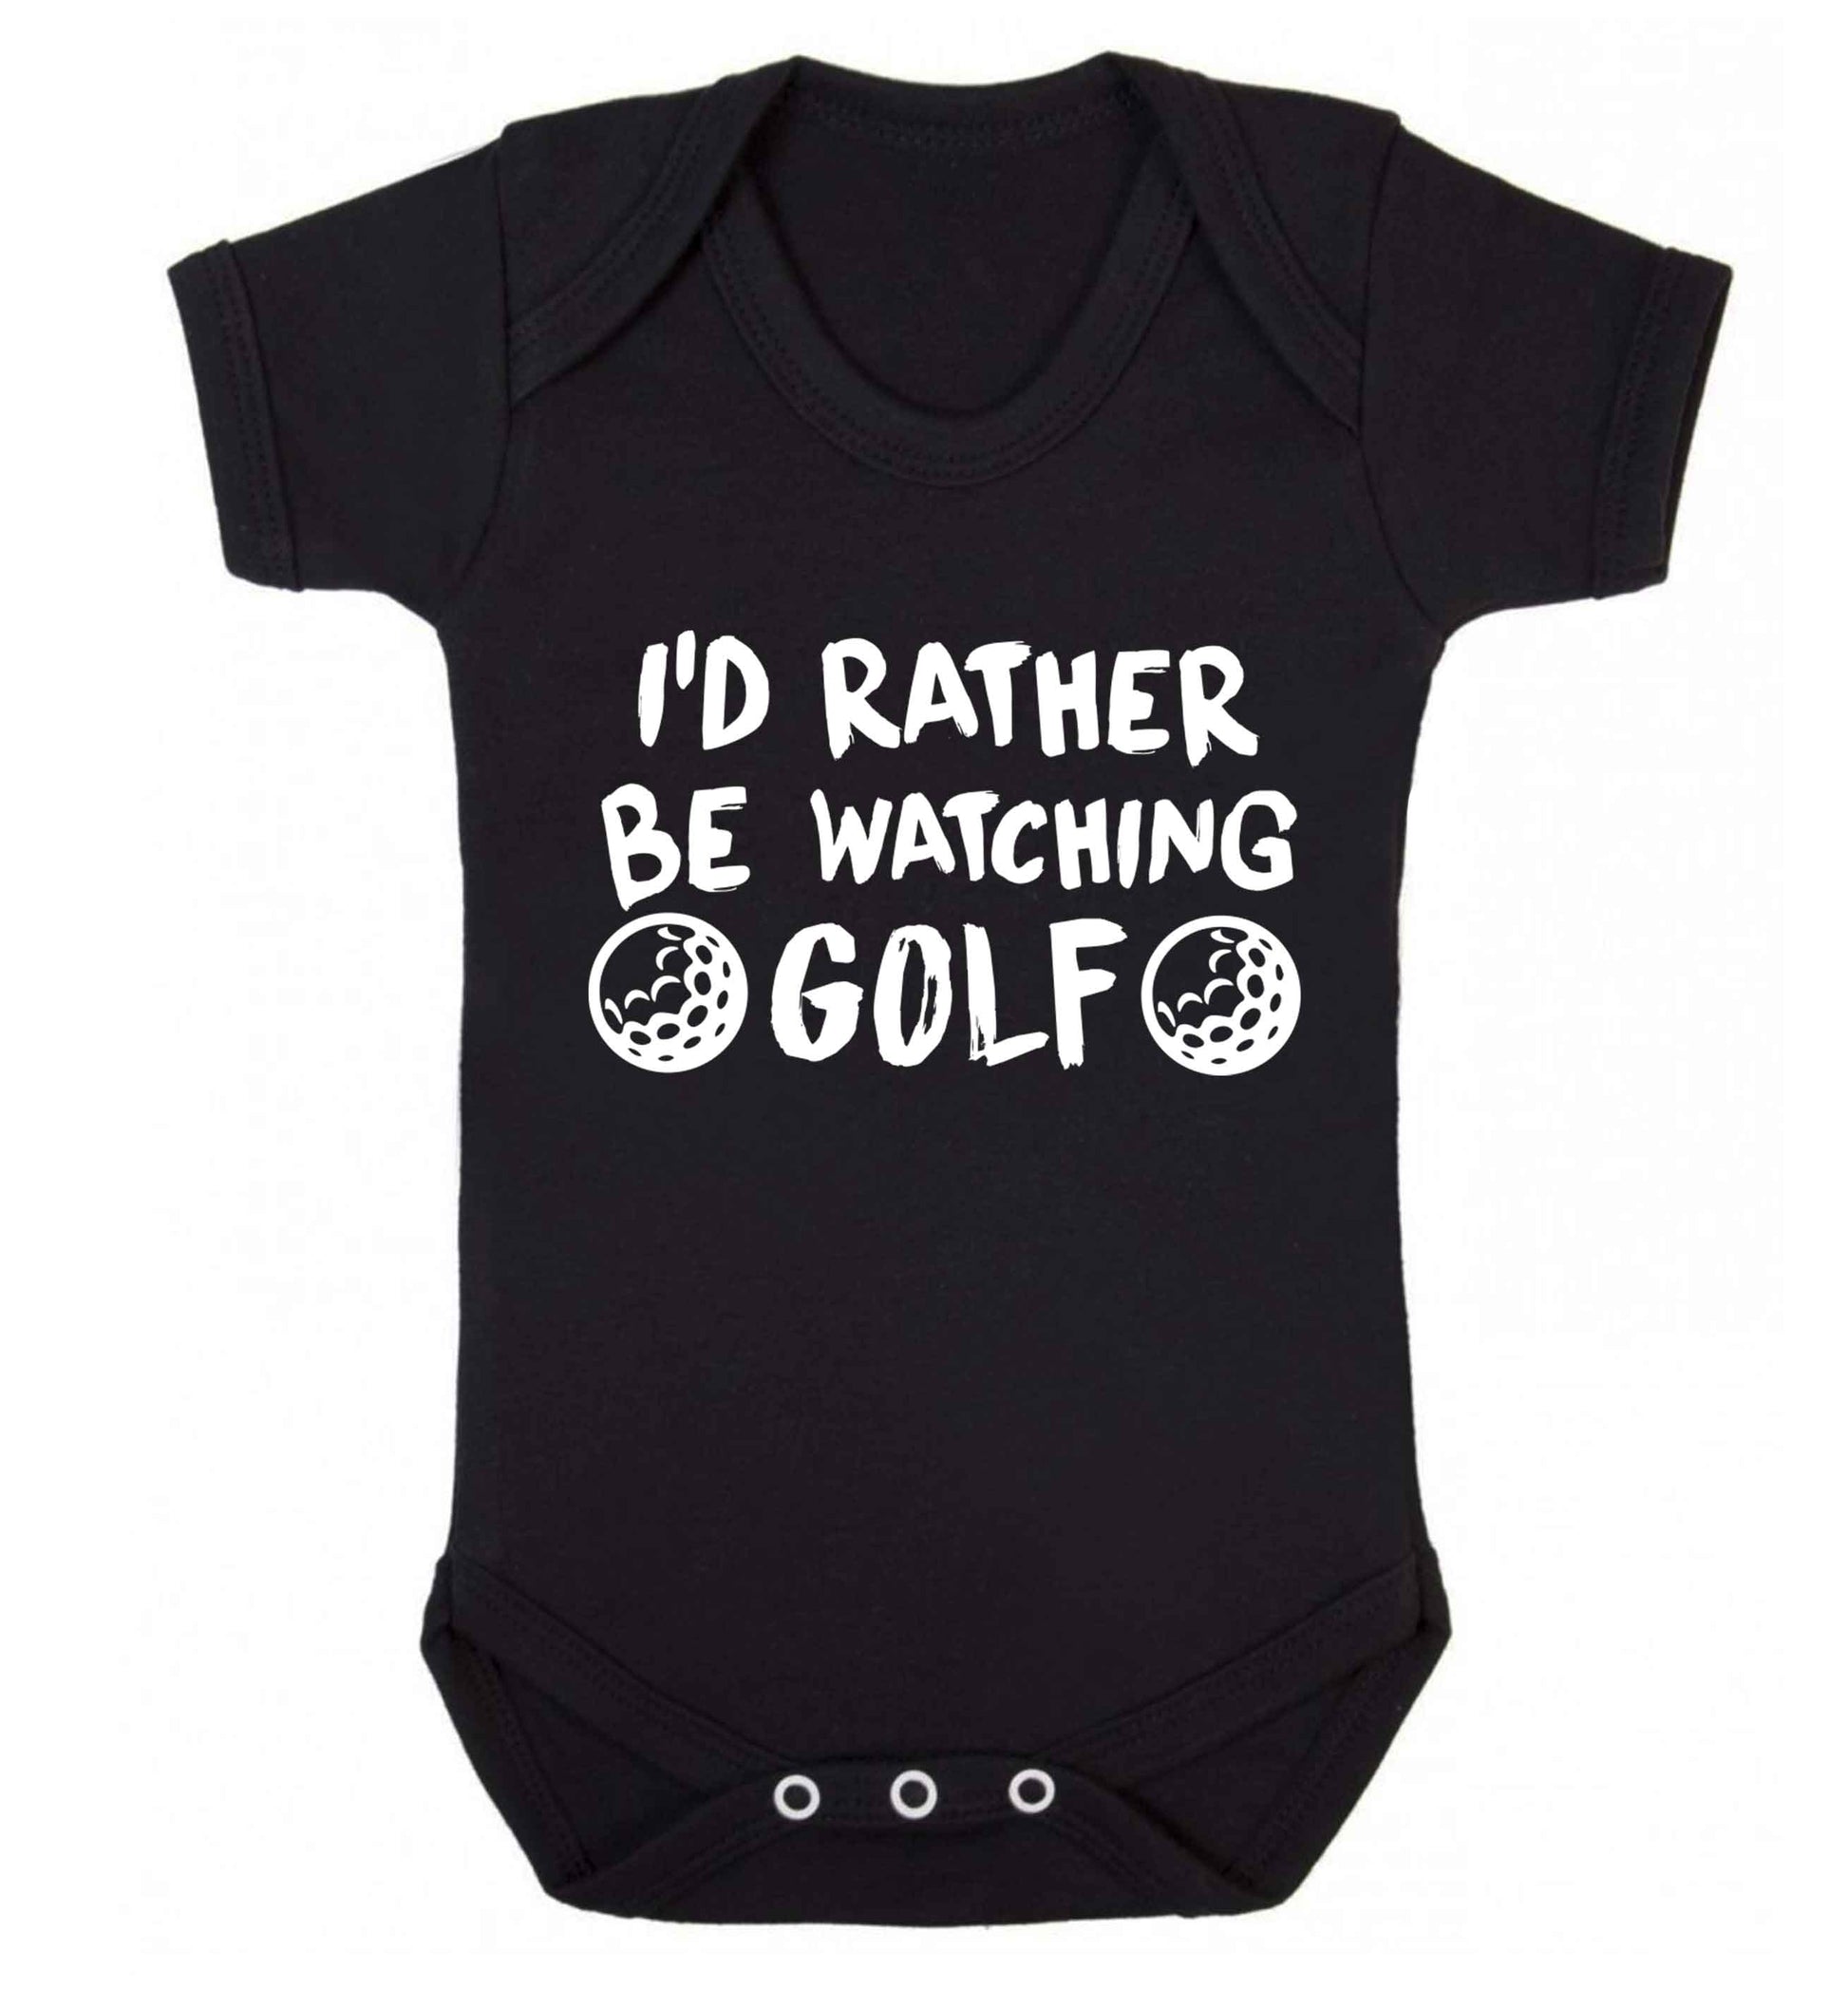 I'd rather be watching golf Baby Vest black 18-24 months